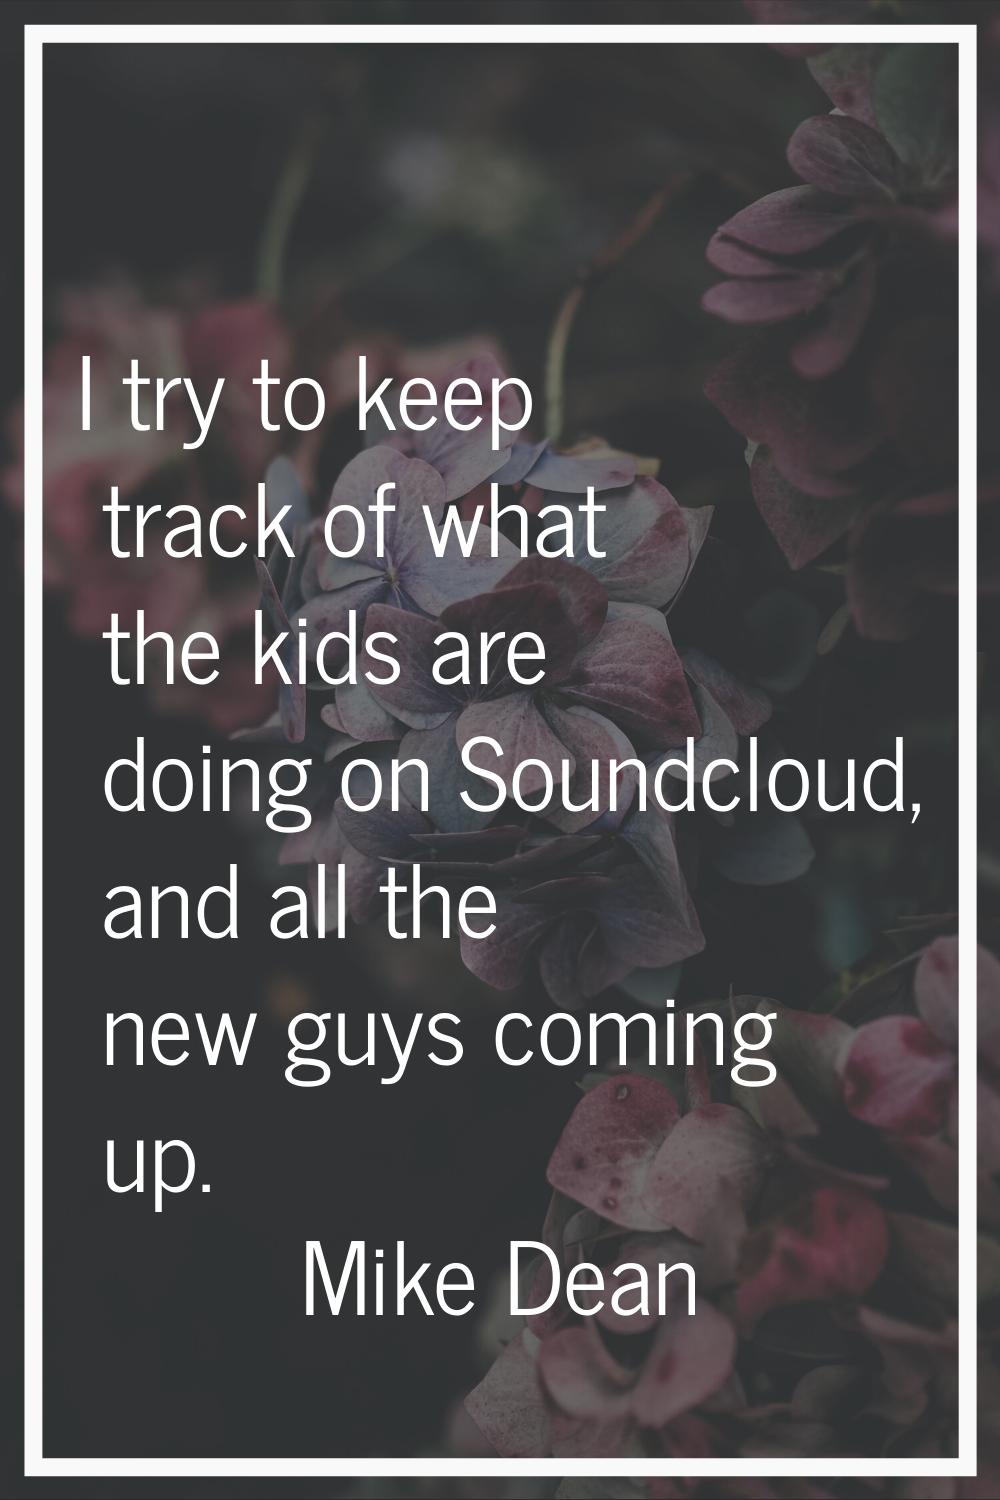 I try to keep track of what the kids are doing on Soundcloud, and all the new guys coming up.